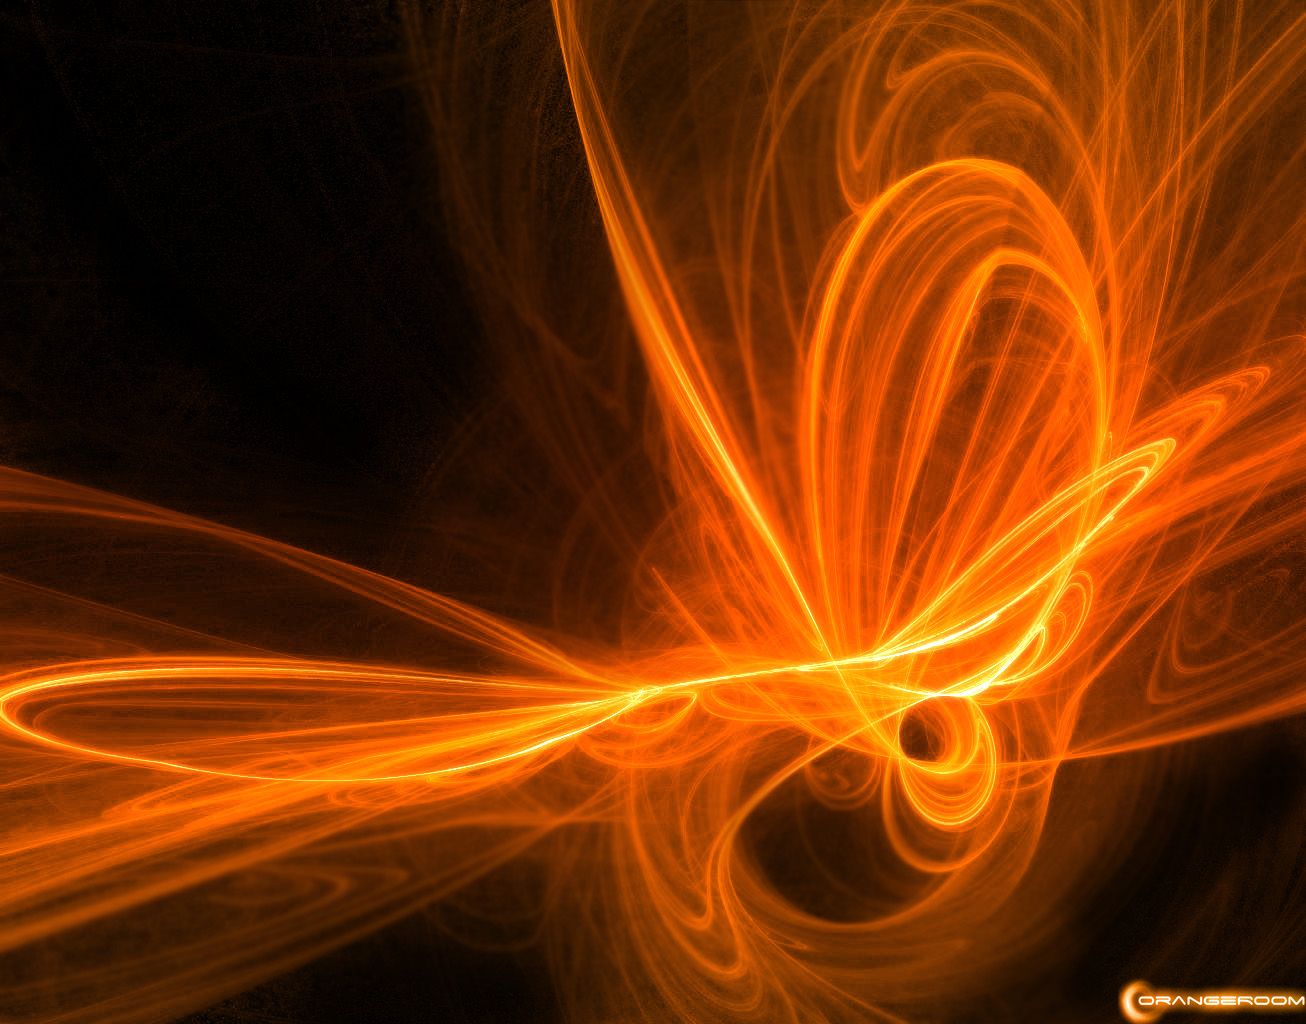 Gallery for - orange backgrounds images